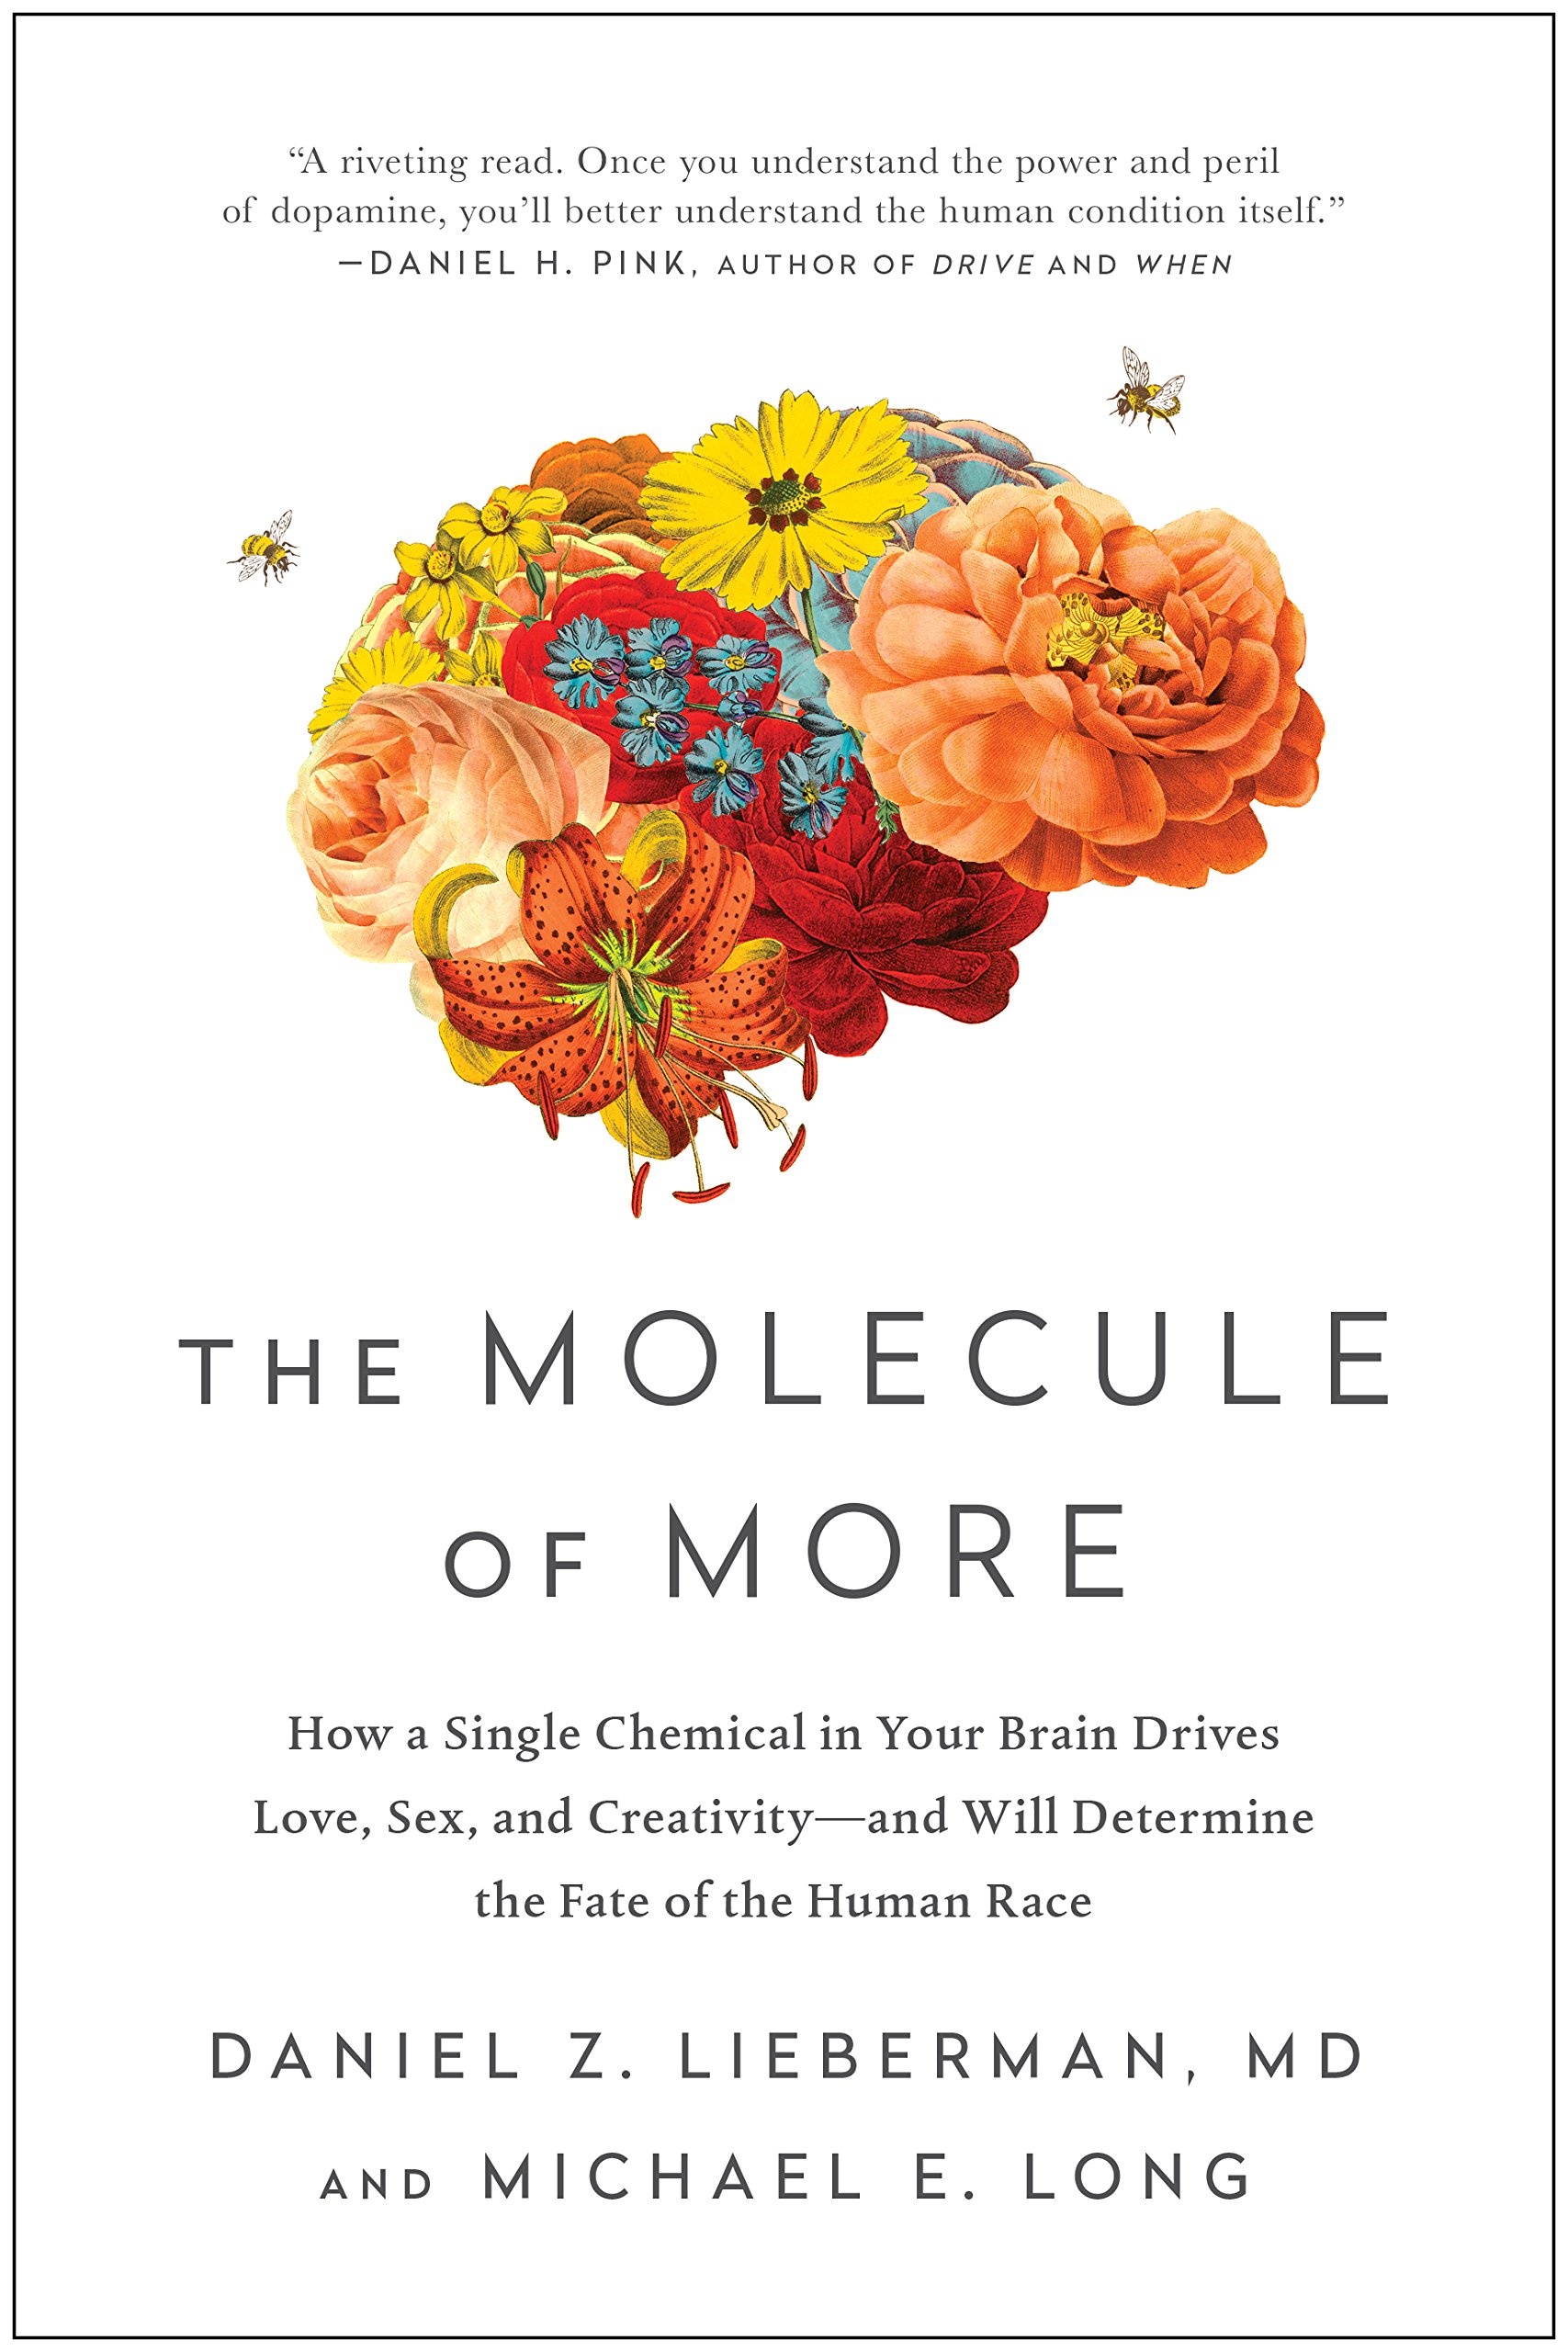 The Molecule of More: How a Single Chemical in Your Brain Drives Love, Sex, and Creativity―and Will Determine the Fate of the Human Race